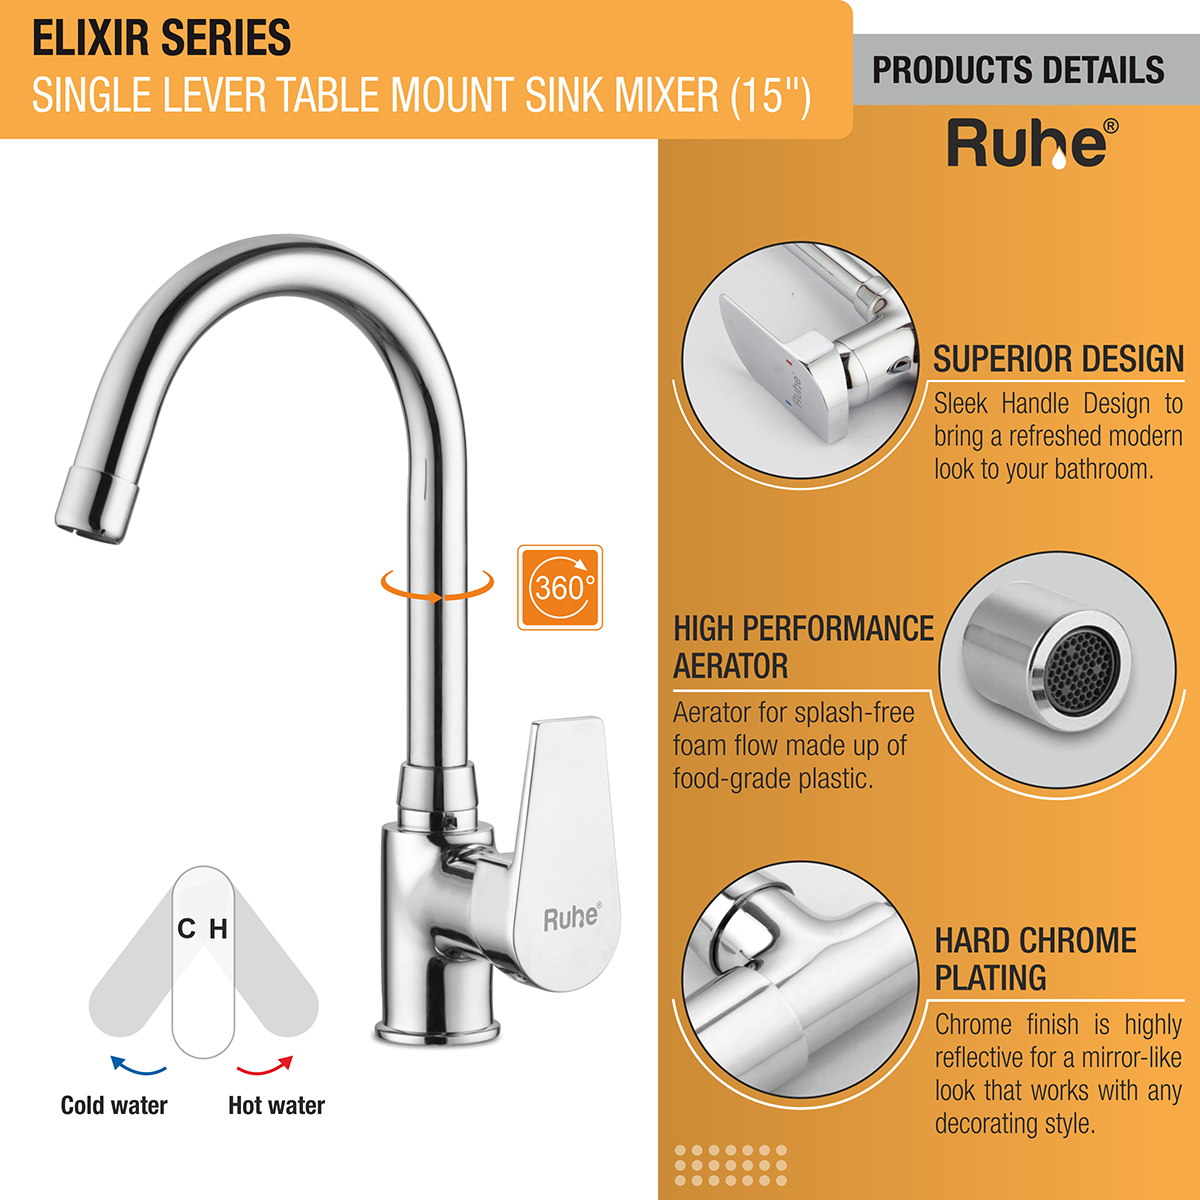 Elixir Single Lever Table Mount Sink Mixer with Medium Round Swivel Spout Faucet product detail